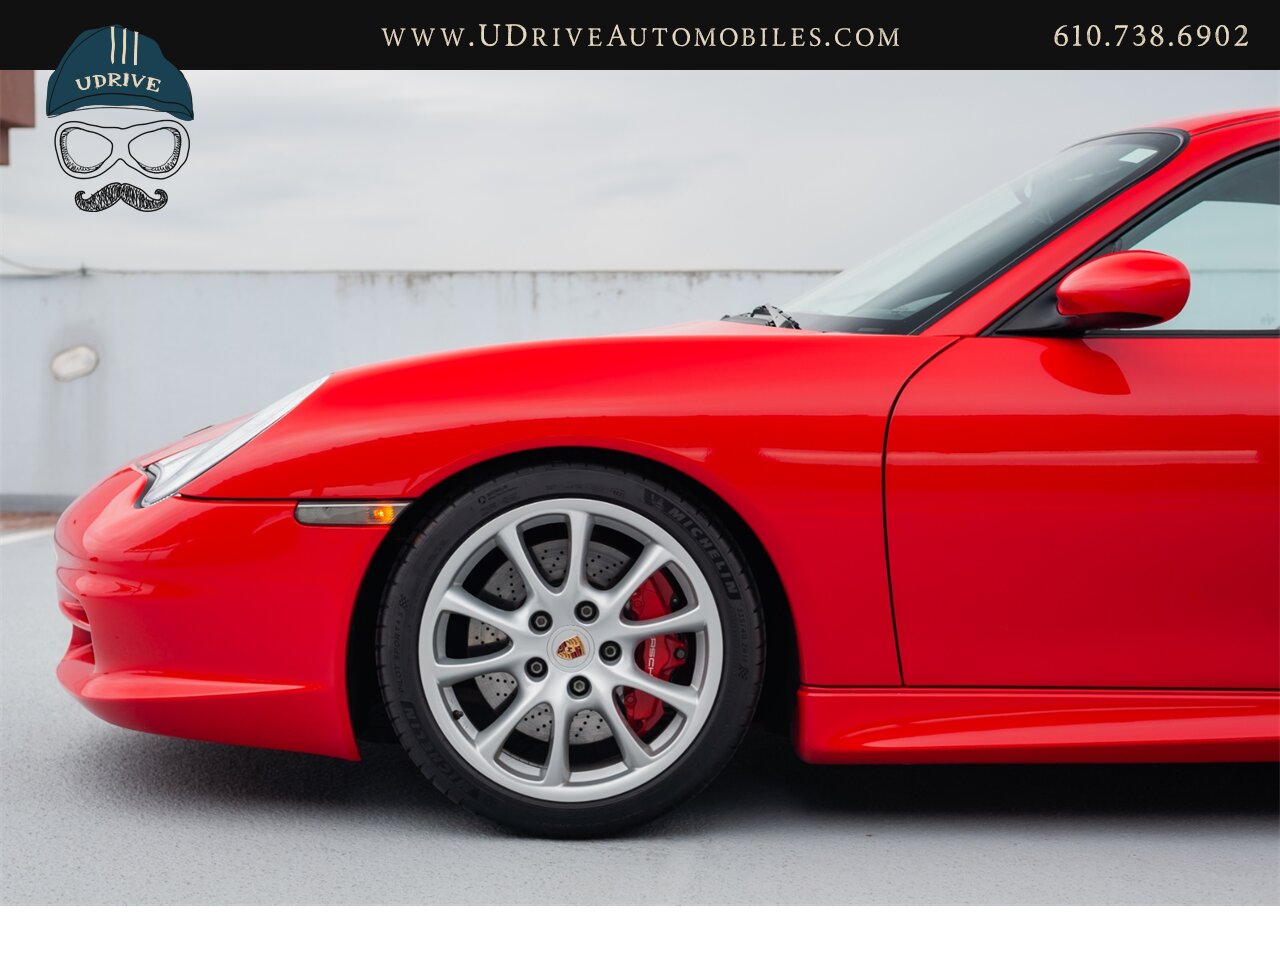 2004 Porsche 911 996 GT3 Guards Red Sport Seats Painted Hardbacks  Painted Center Console 18k Miles - Photo 10 - West Chester, PA 19382